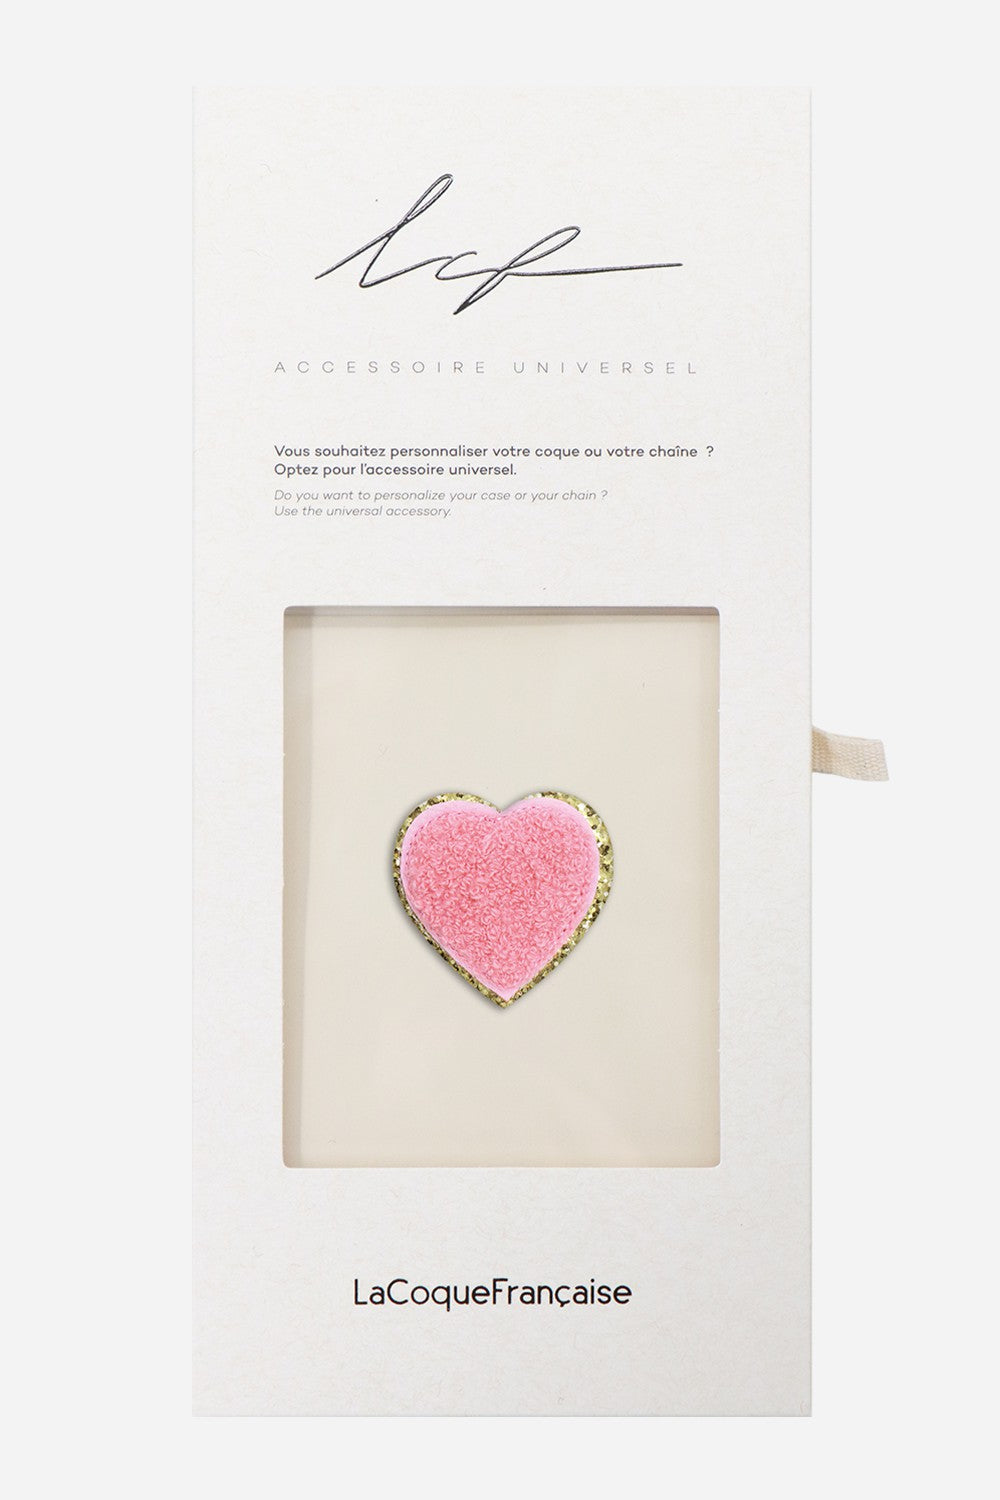 Pink Heart Patch